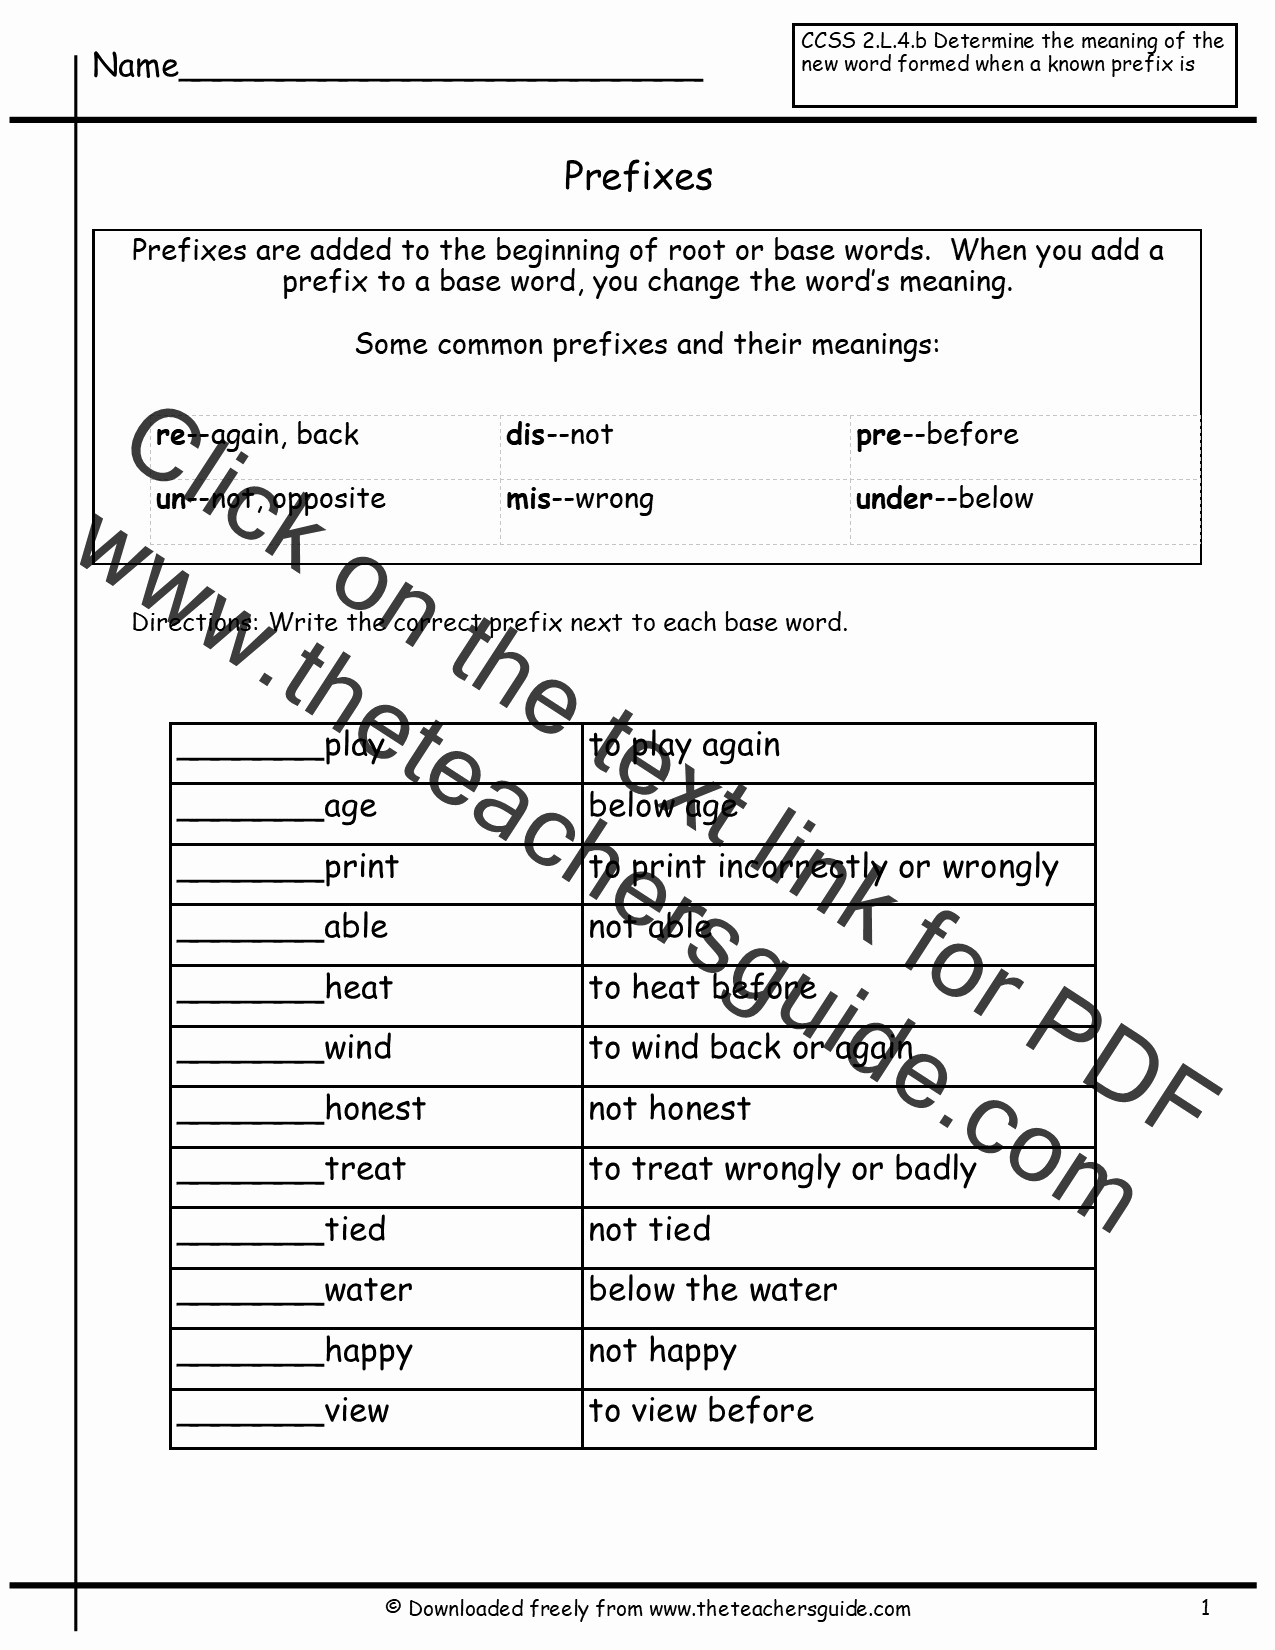 Suffix Worksheets for 4th Grade Inspirational Prefix and Suffix Games 4th Grade